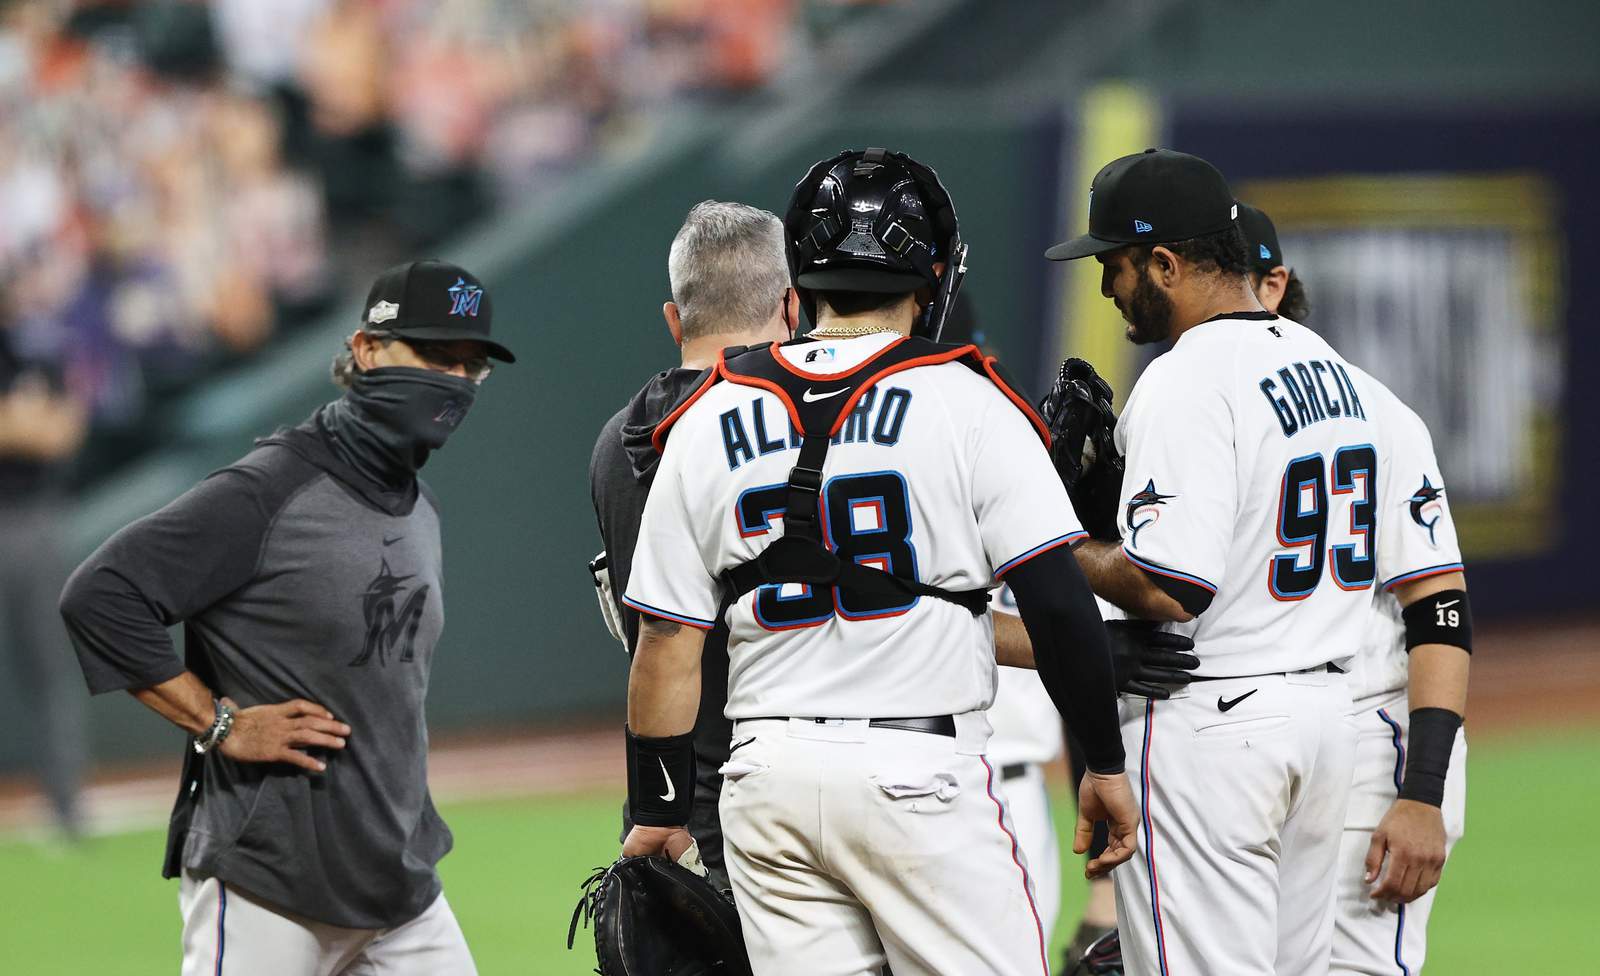 Marlins lose a postseason series for the first time, swept by Braves in NLDS